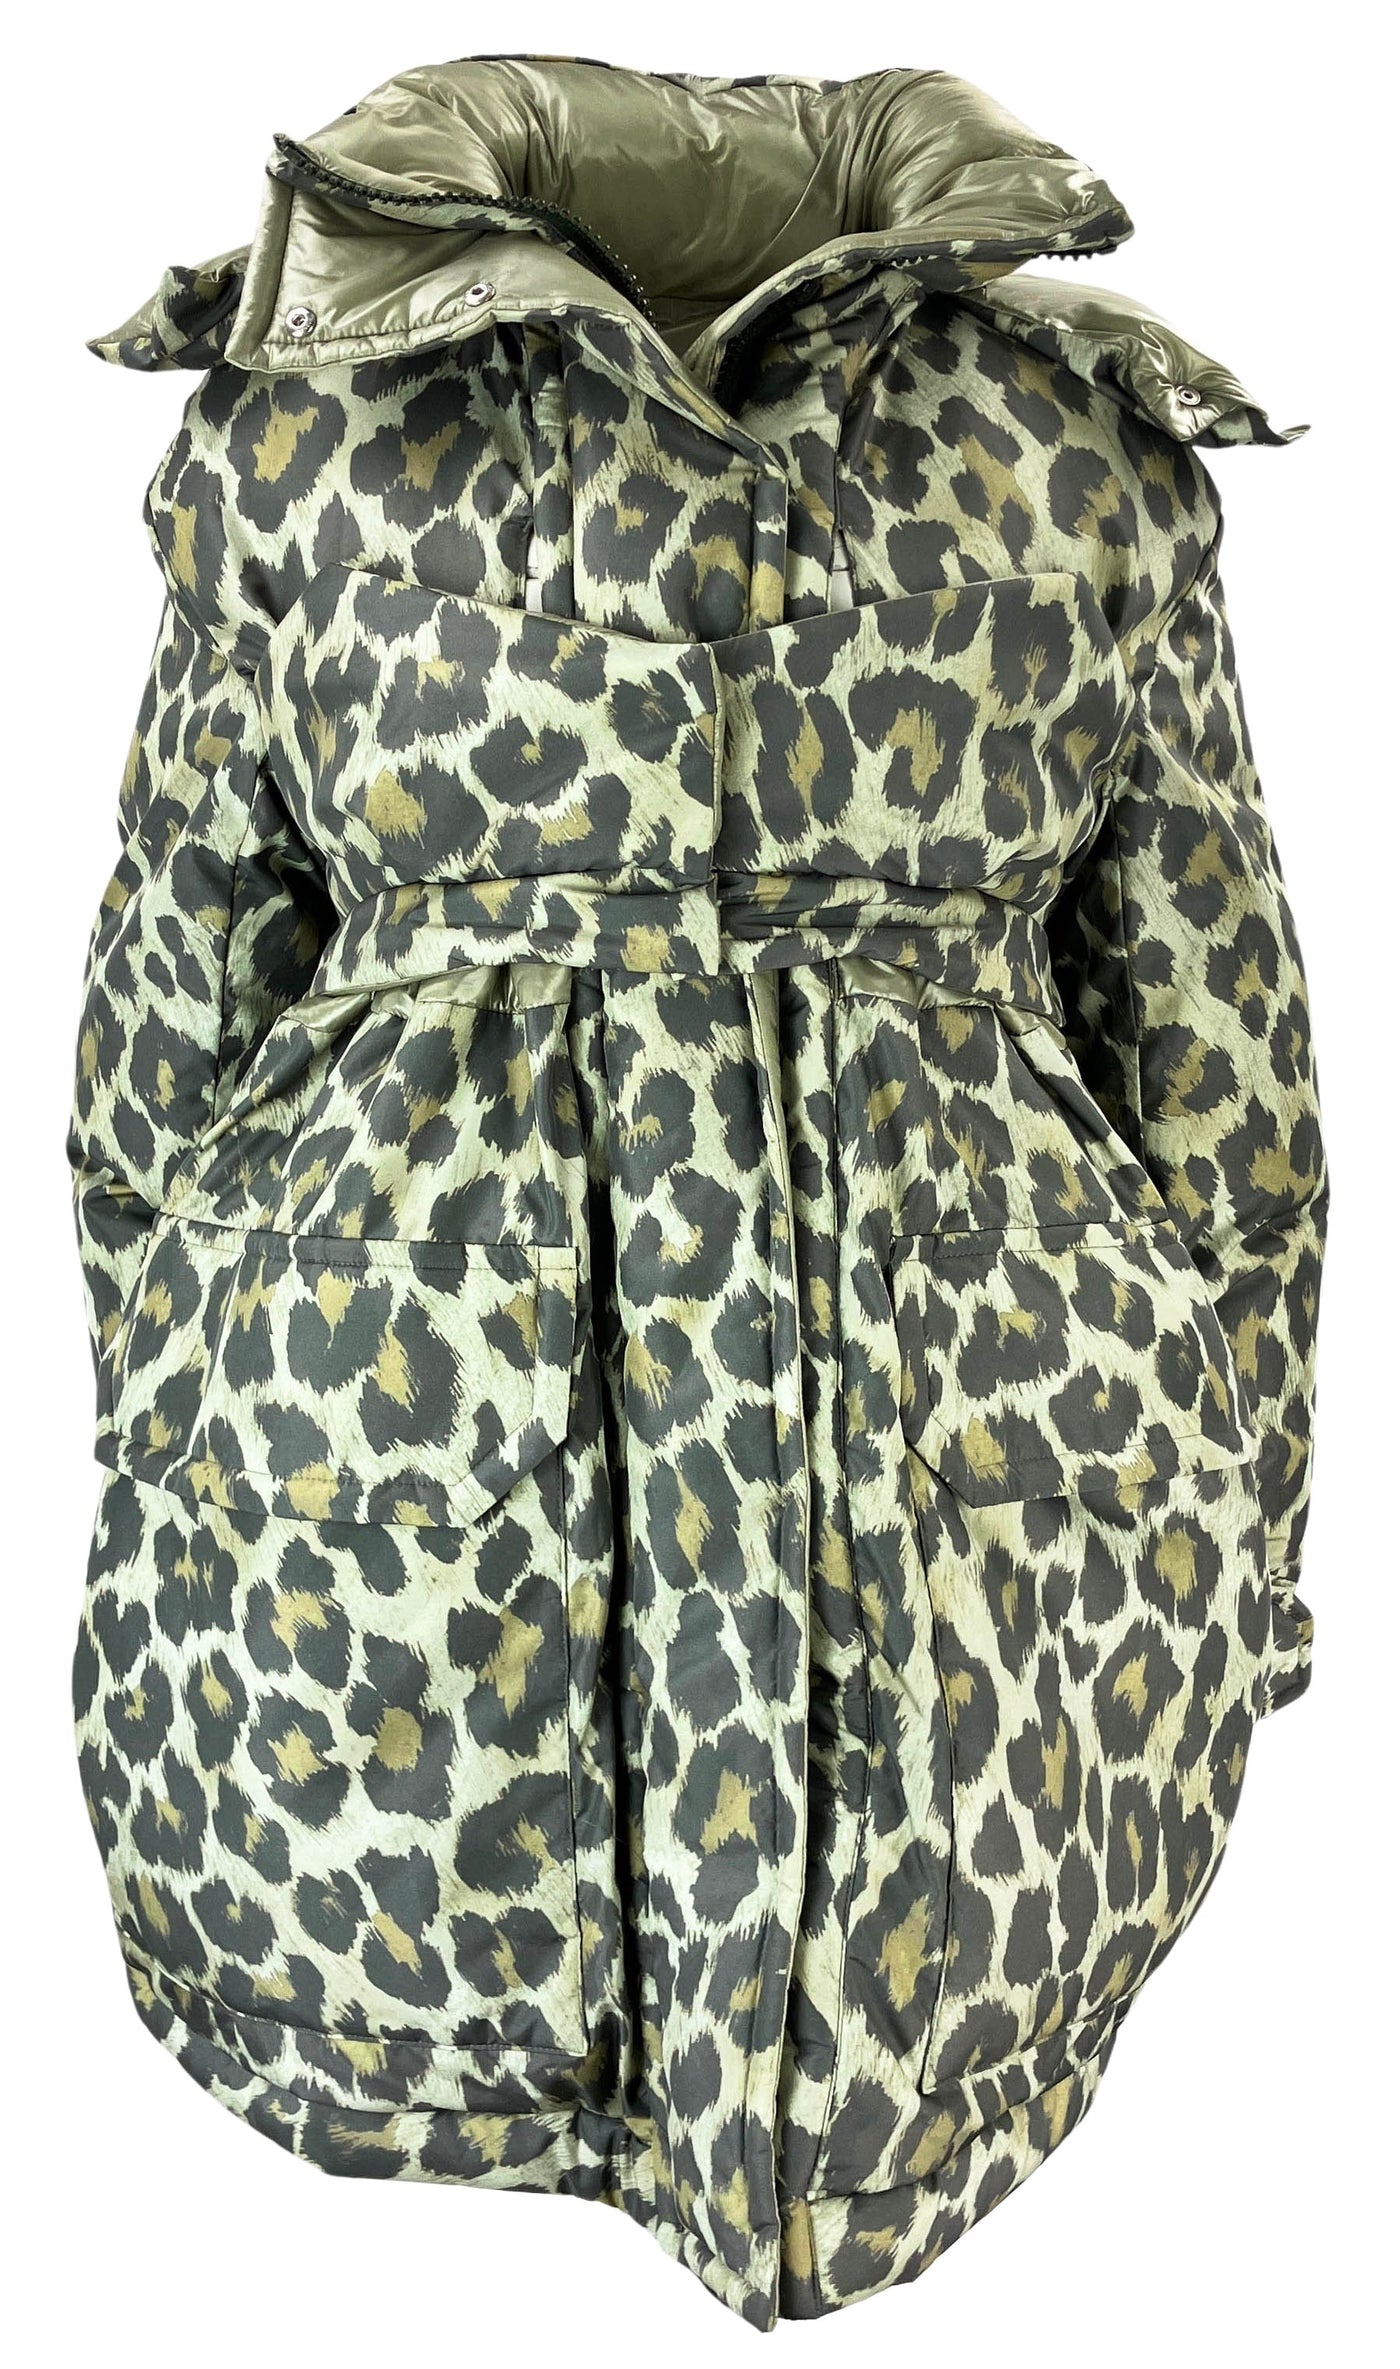 sacai Leopard Print Hooded Puffer Jacket in Green - Discounts on Sacai at UAL